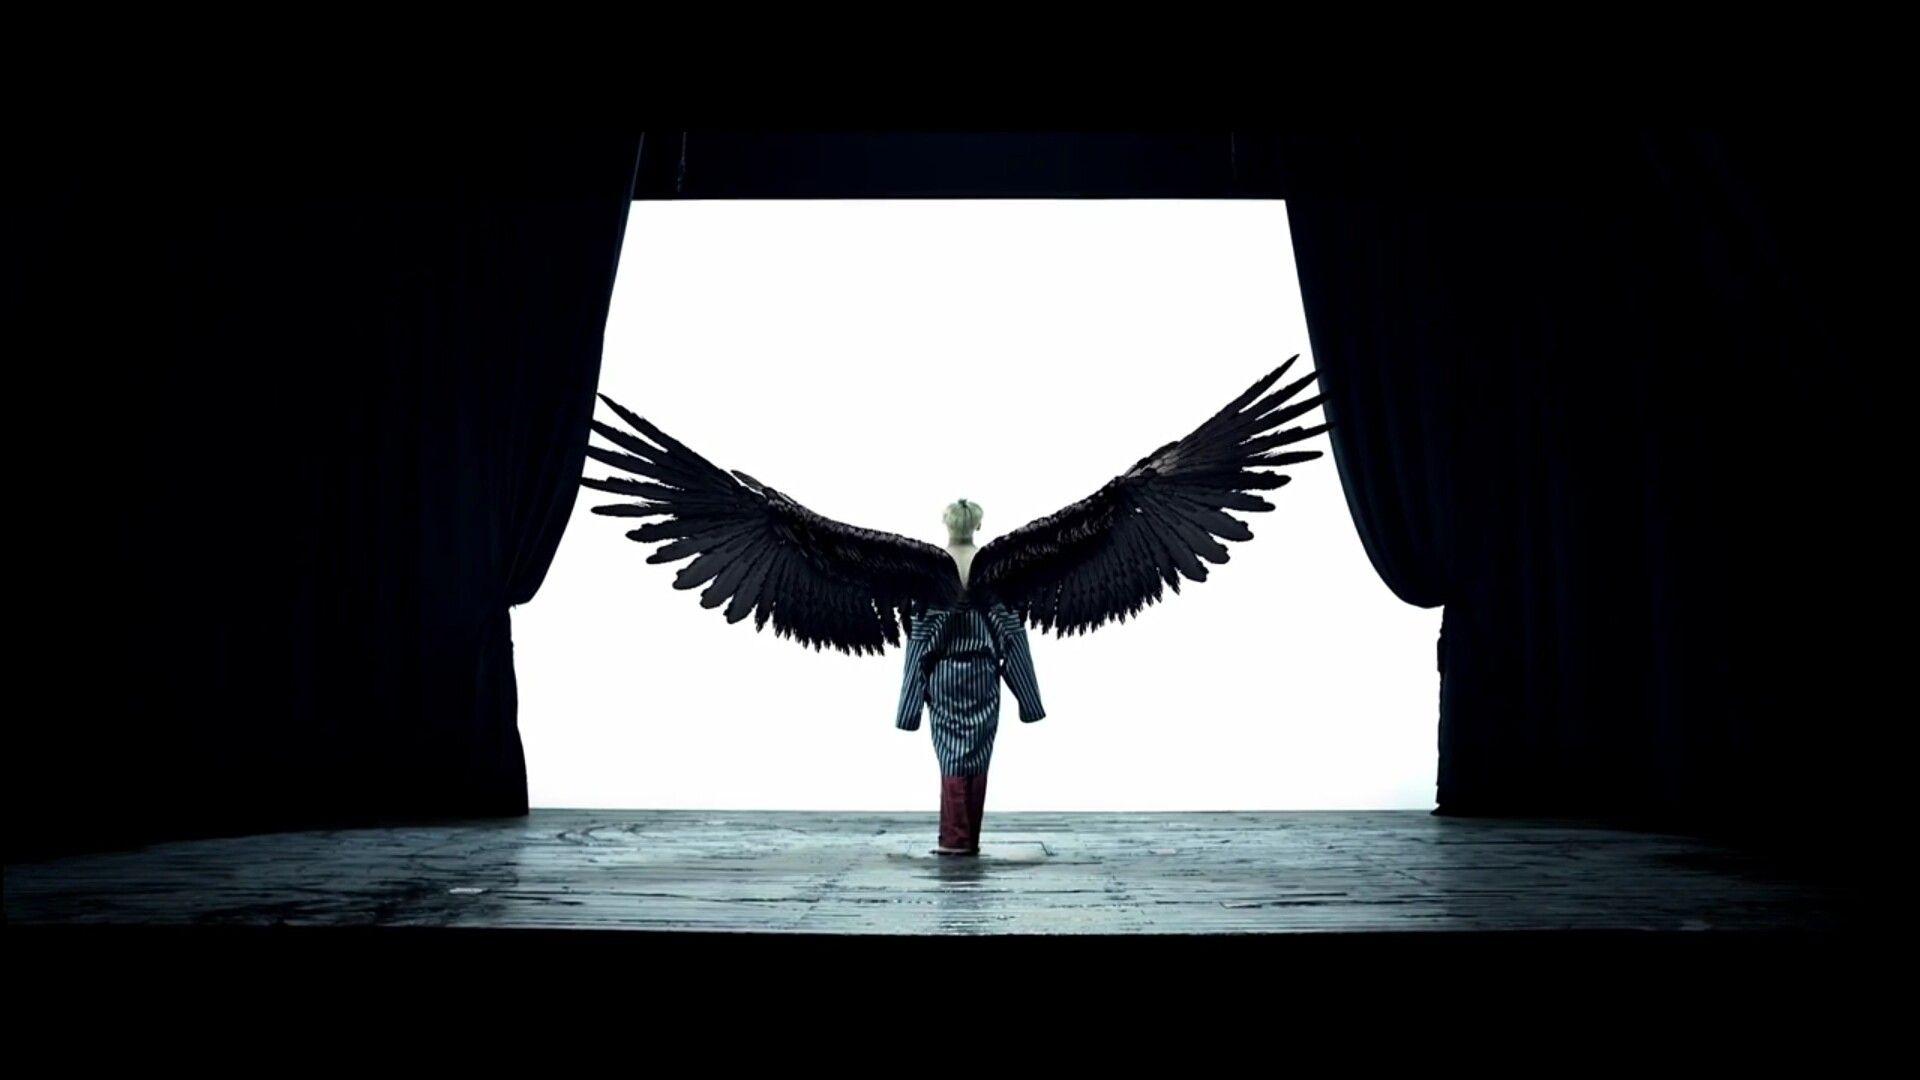  BTS  Wings  Wallpapers  Top Free BTS  Wings  Backgrounds  